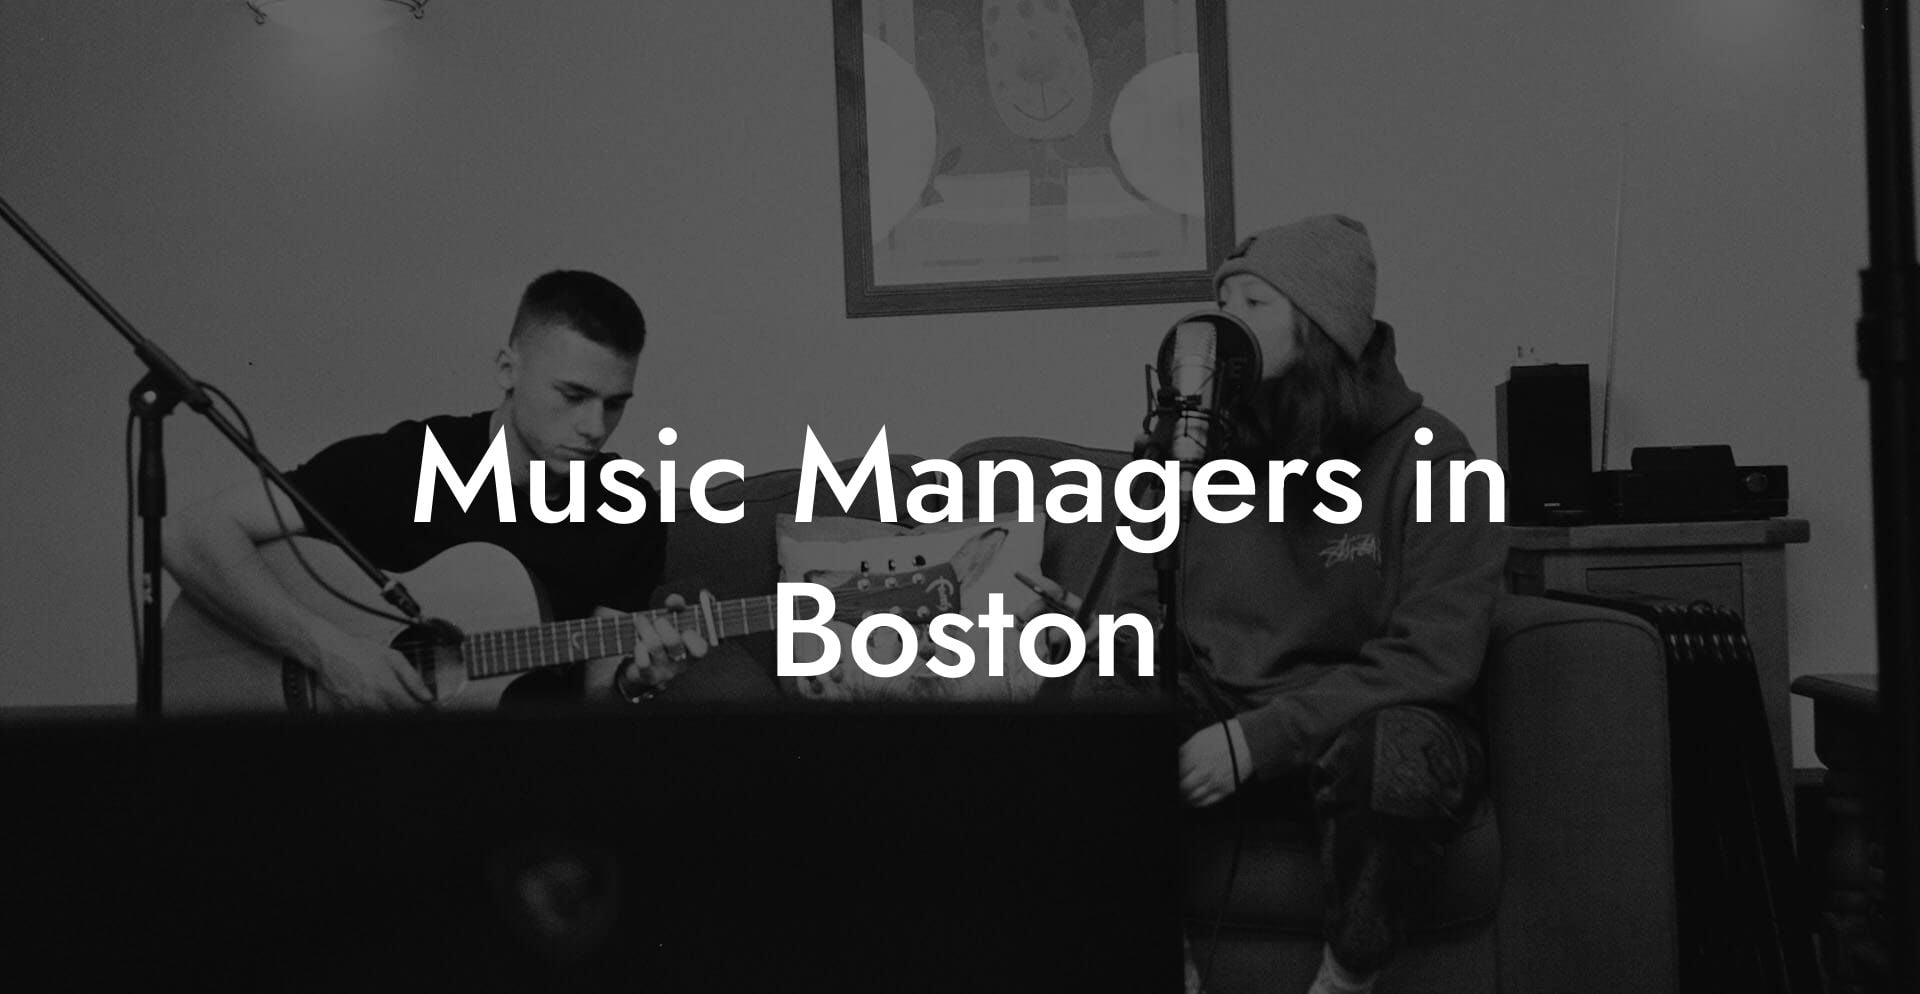 Music Managers in Boston